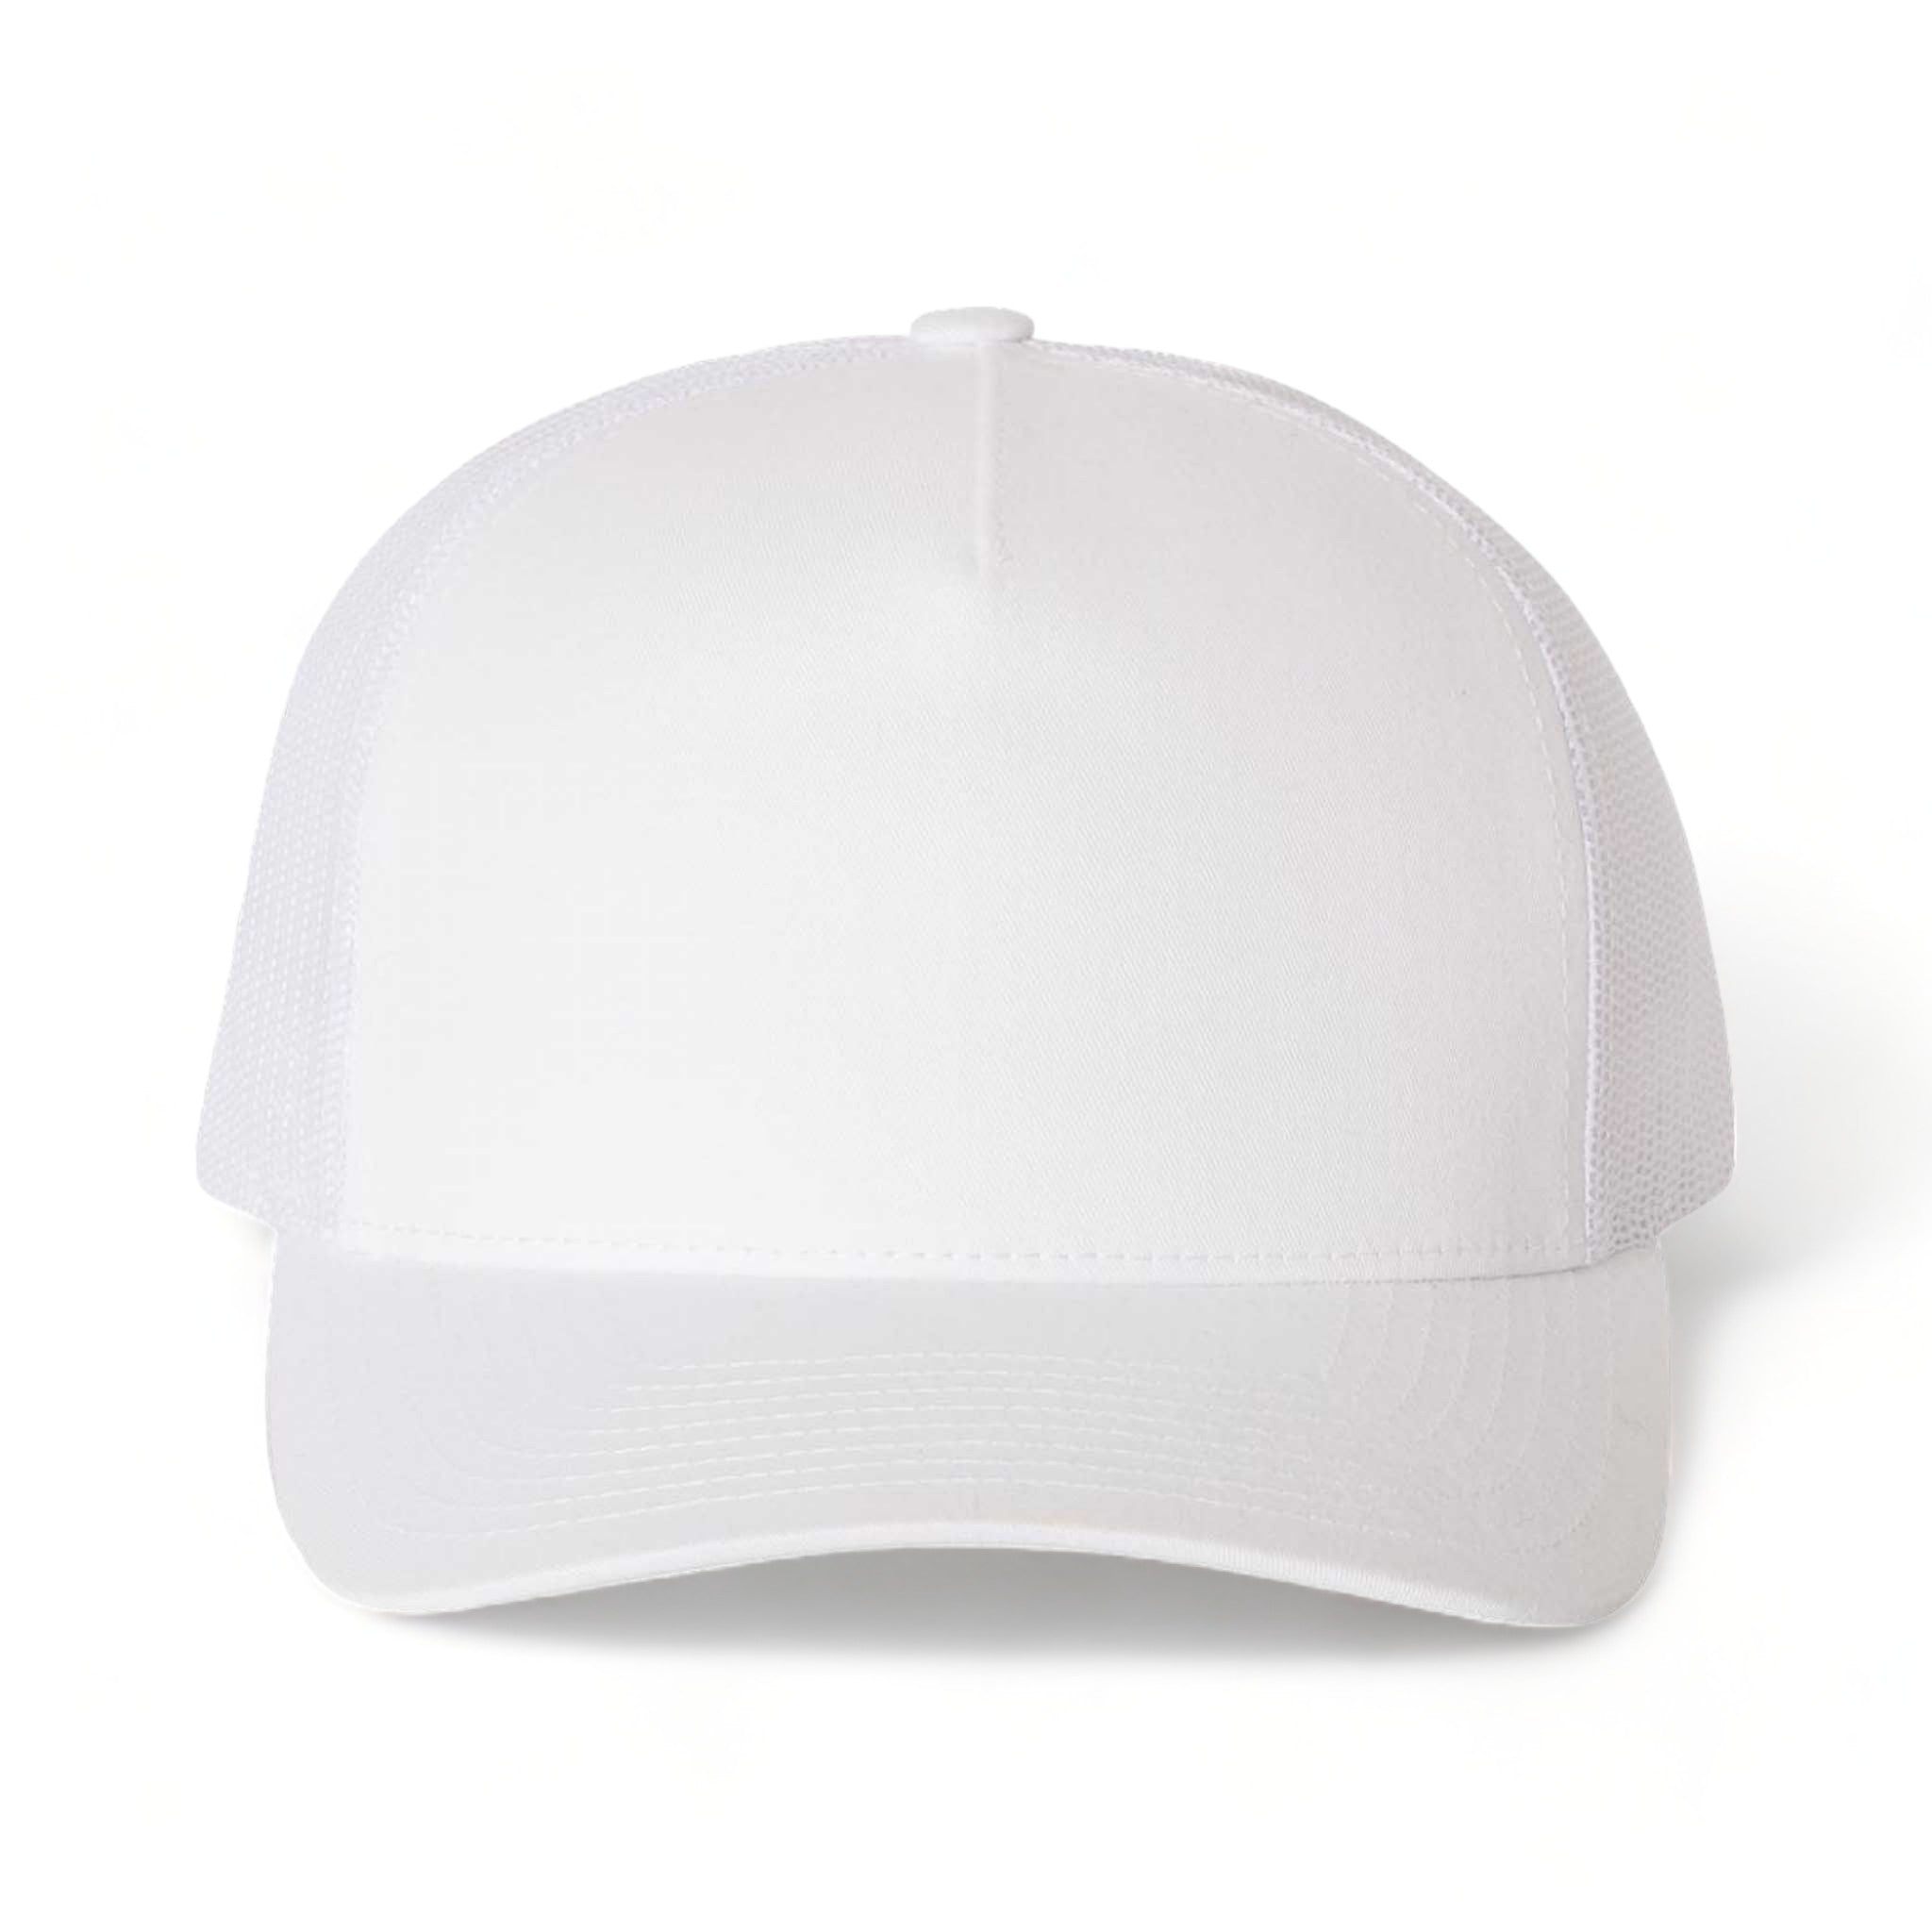 Front view of YP Classics 6506 custom hat in white